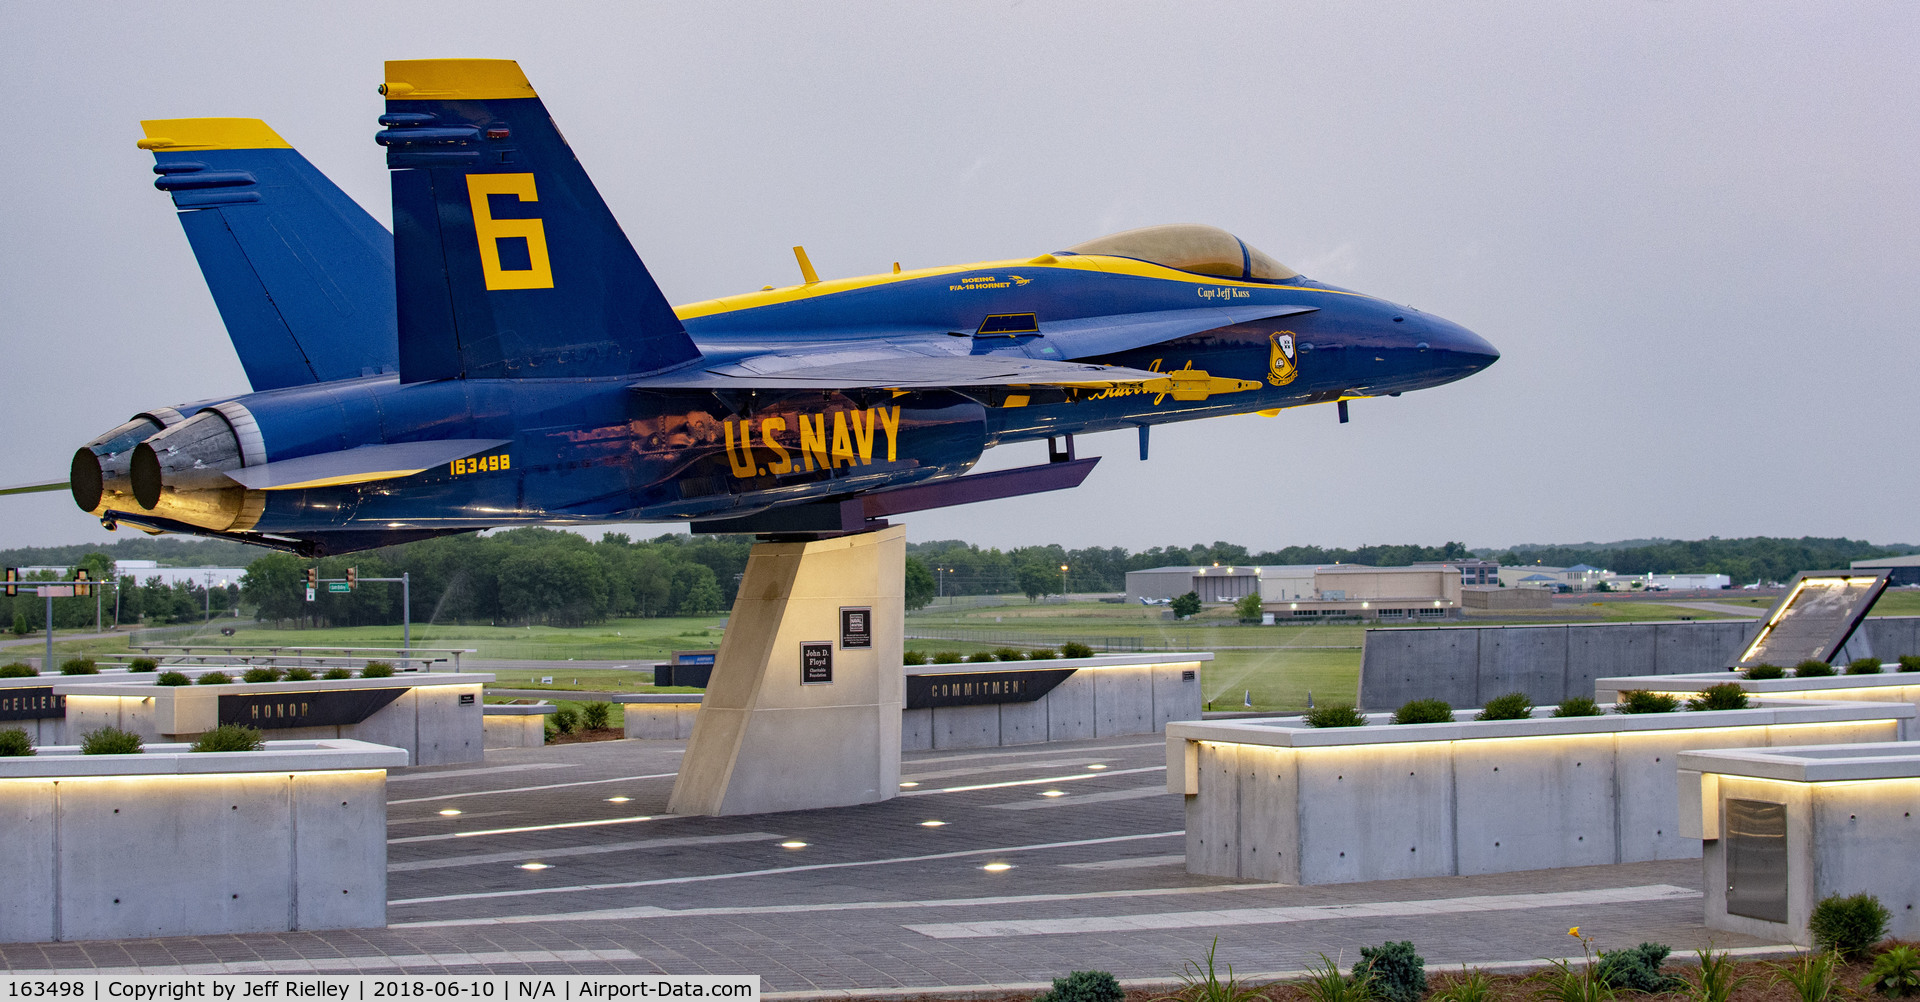 163498, 1988 McDonnell Douglas F/A-18C Hornet C/N 0737/C053, Now on display at Lee Victory Park in Smyrna, Tennessee as a memorial to pilot Capt. Jeff Kuss who died on 2 June, 2016 while practicing for the Great Tennessee Air Show in Smyrna, TN.